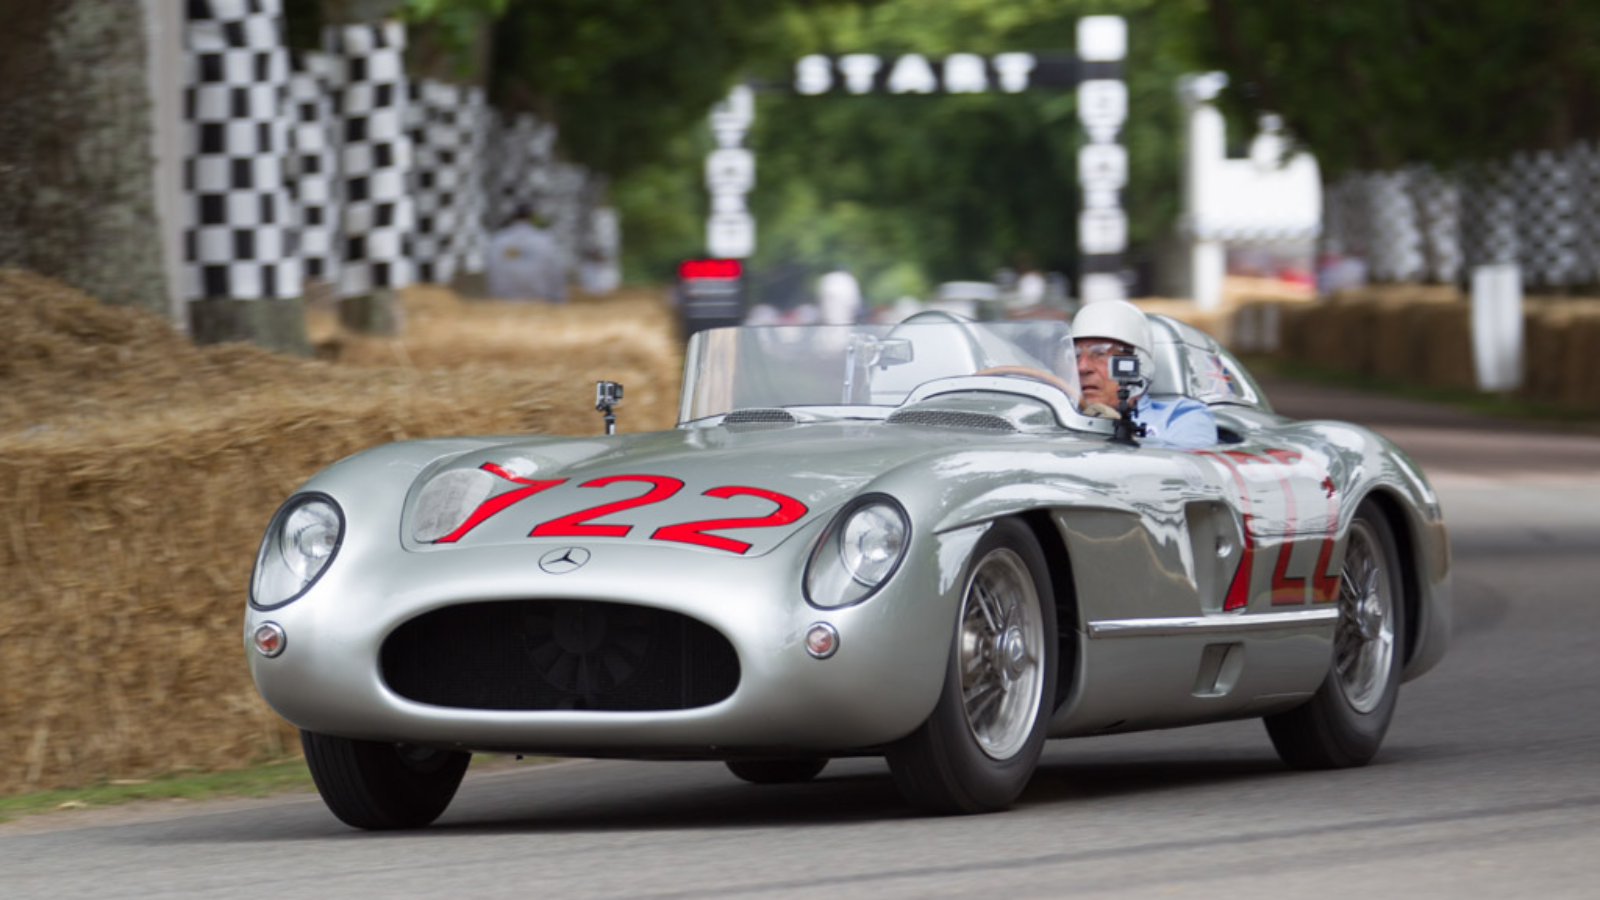 7 Amazing Facts About The Mercedes Benz 300 Slr 722 Mbworld